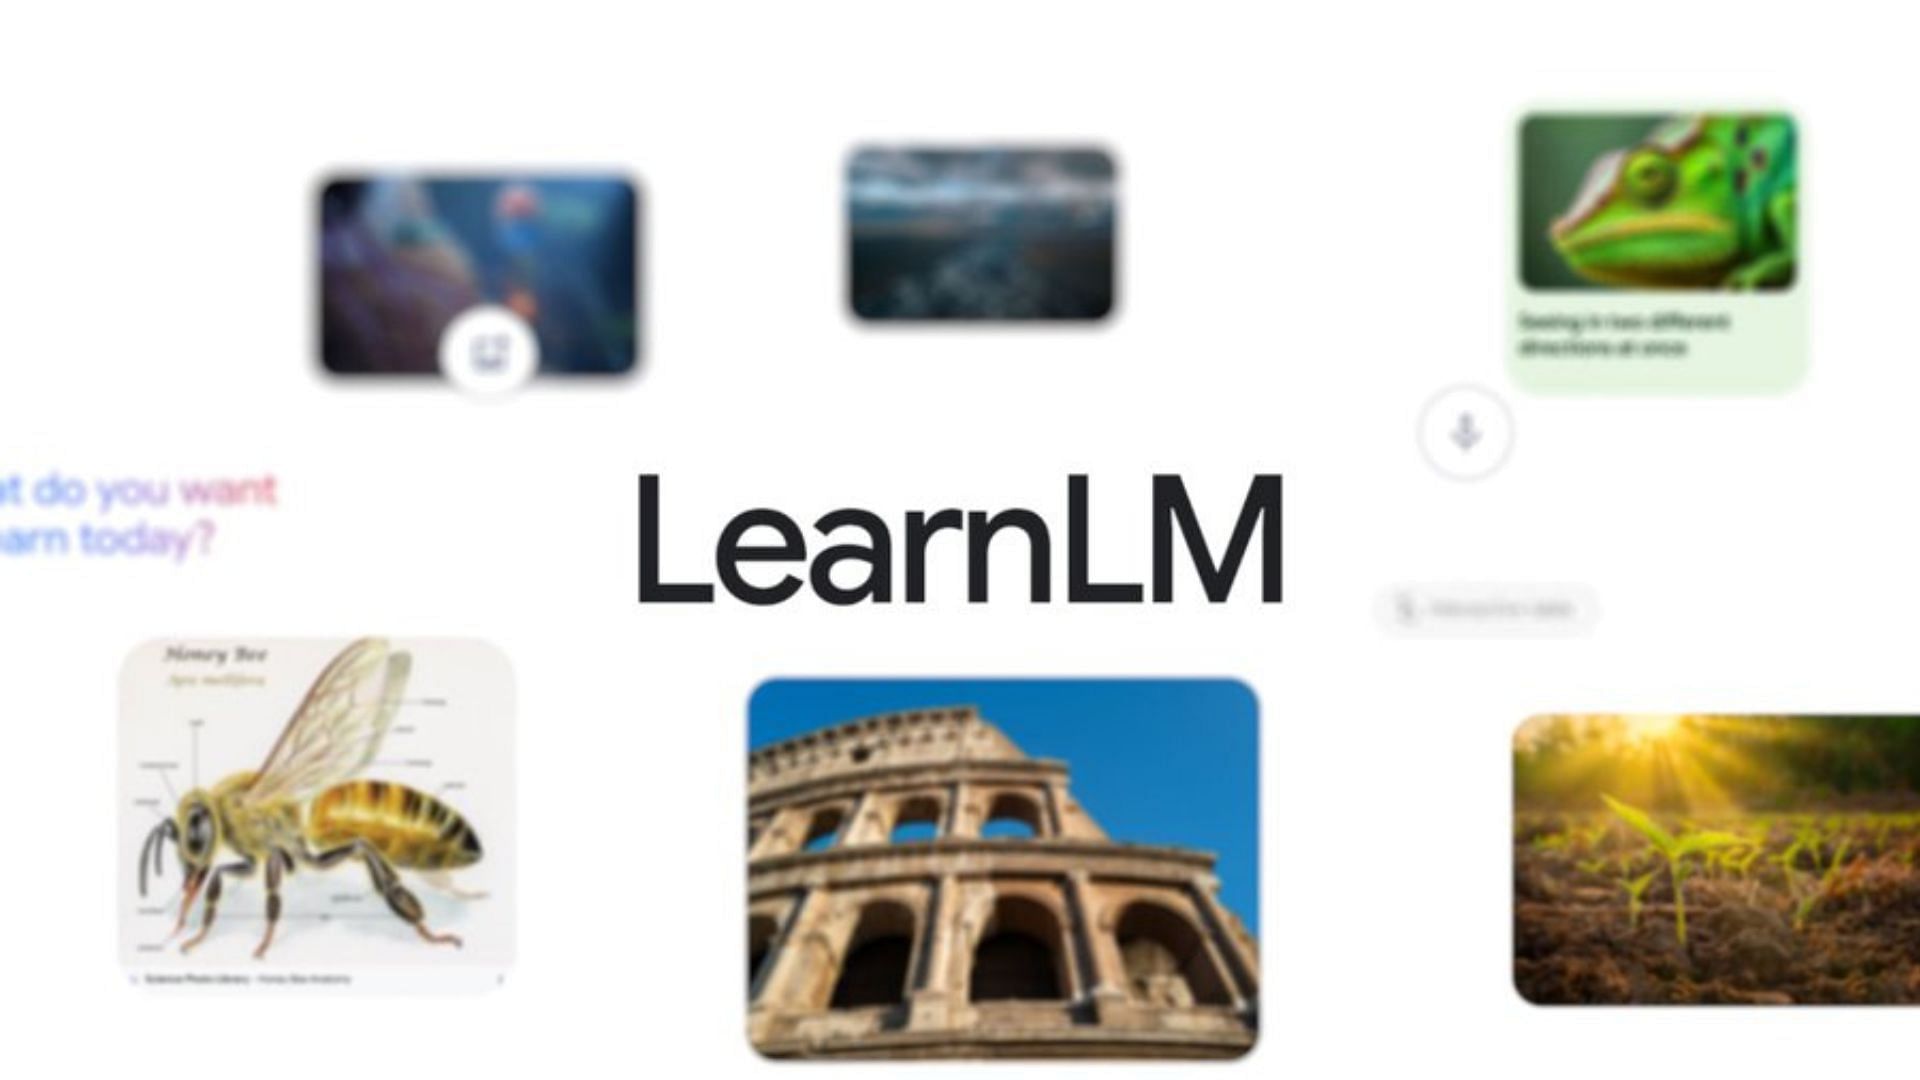 Learn LM is another feature introduced at the Google I/O event (Image via X/Google)